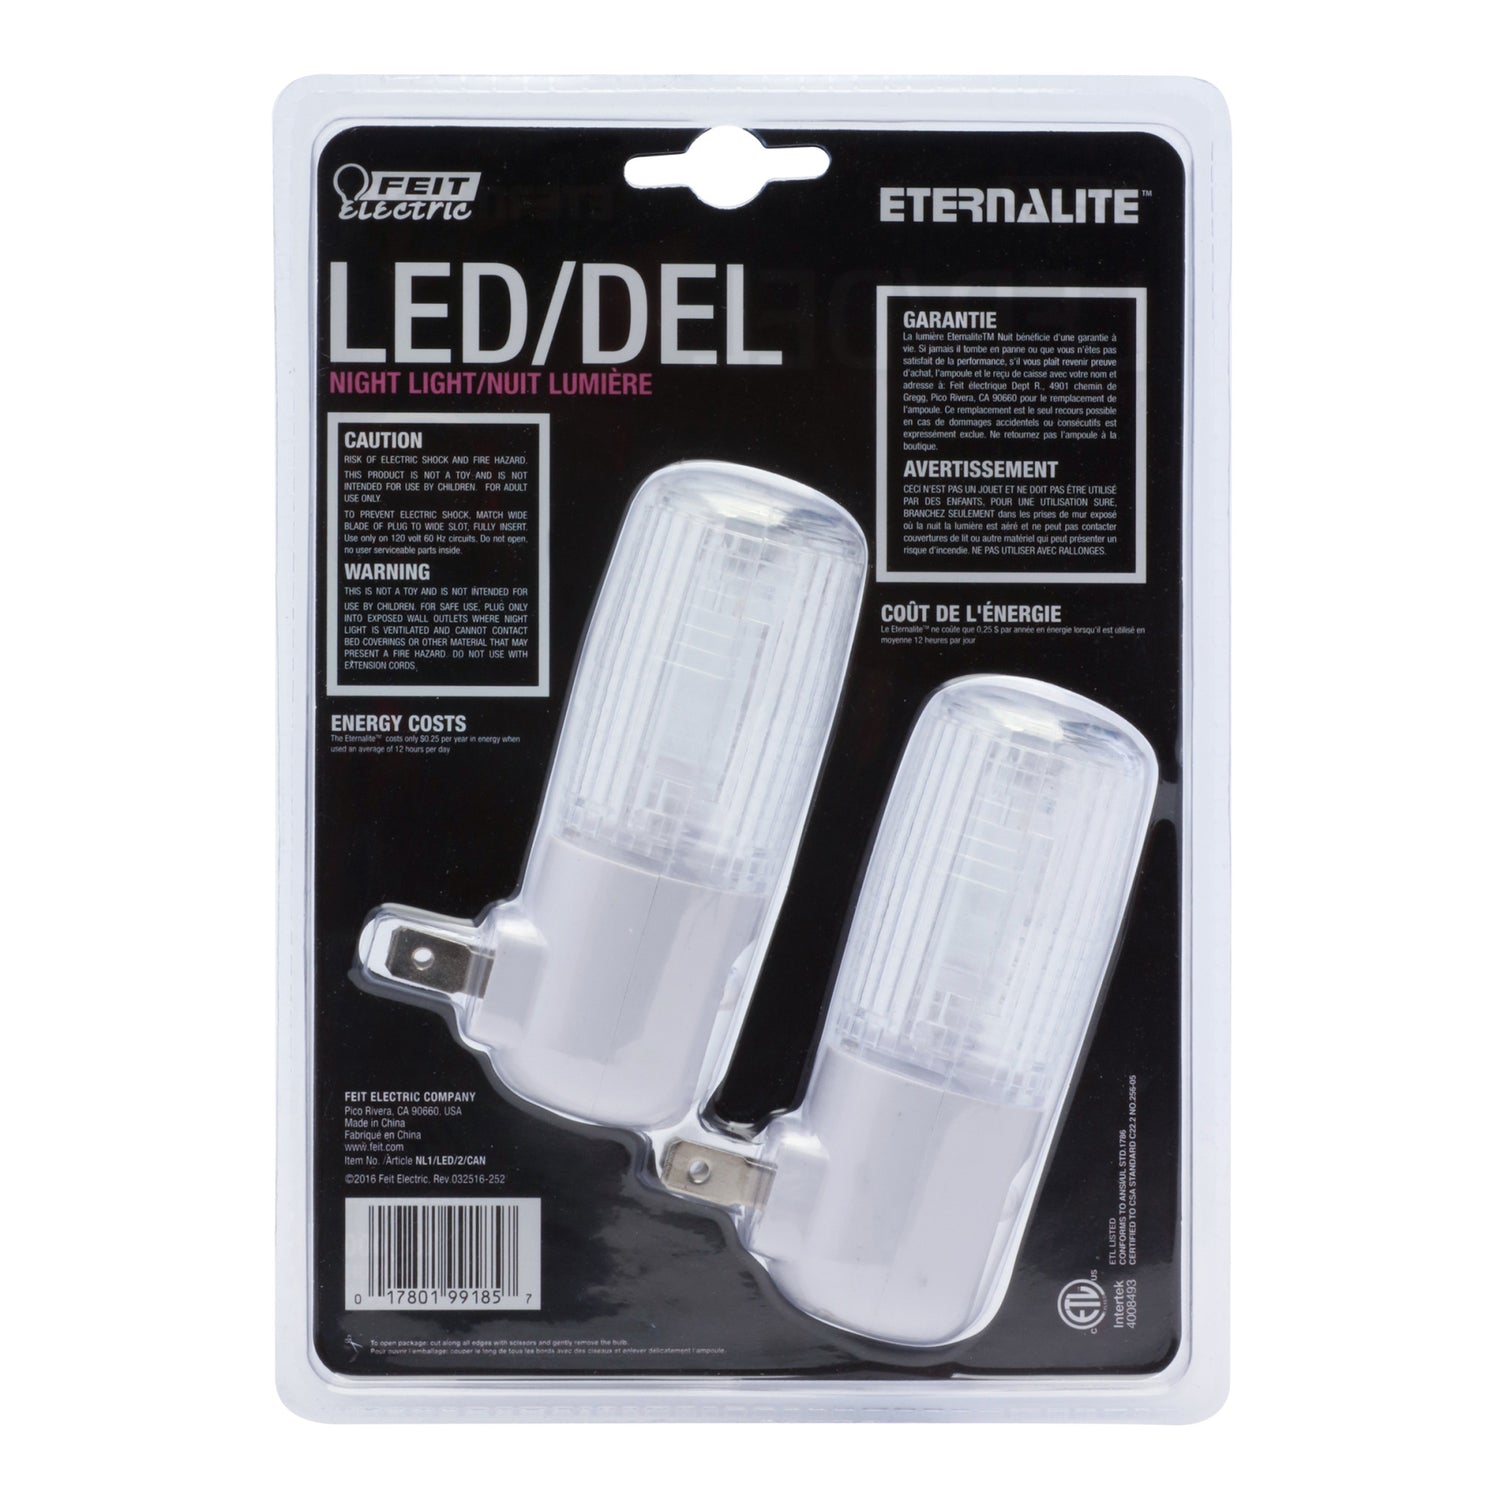 Eternalite 1W Replacement Automatic Sensor Dusk to Dawn LED Night Light (2-Pack)